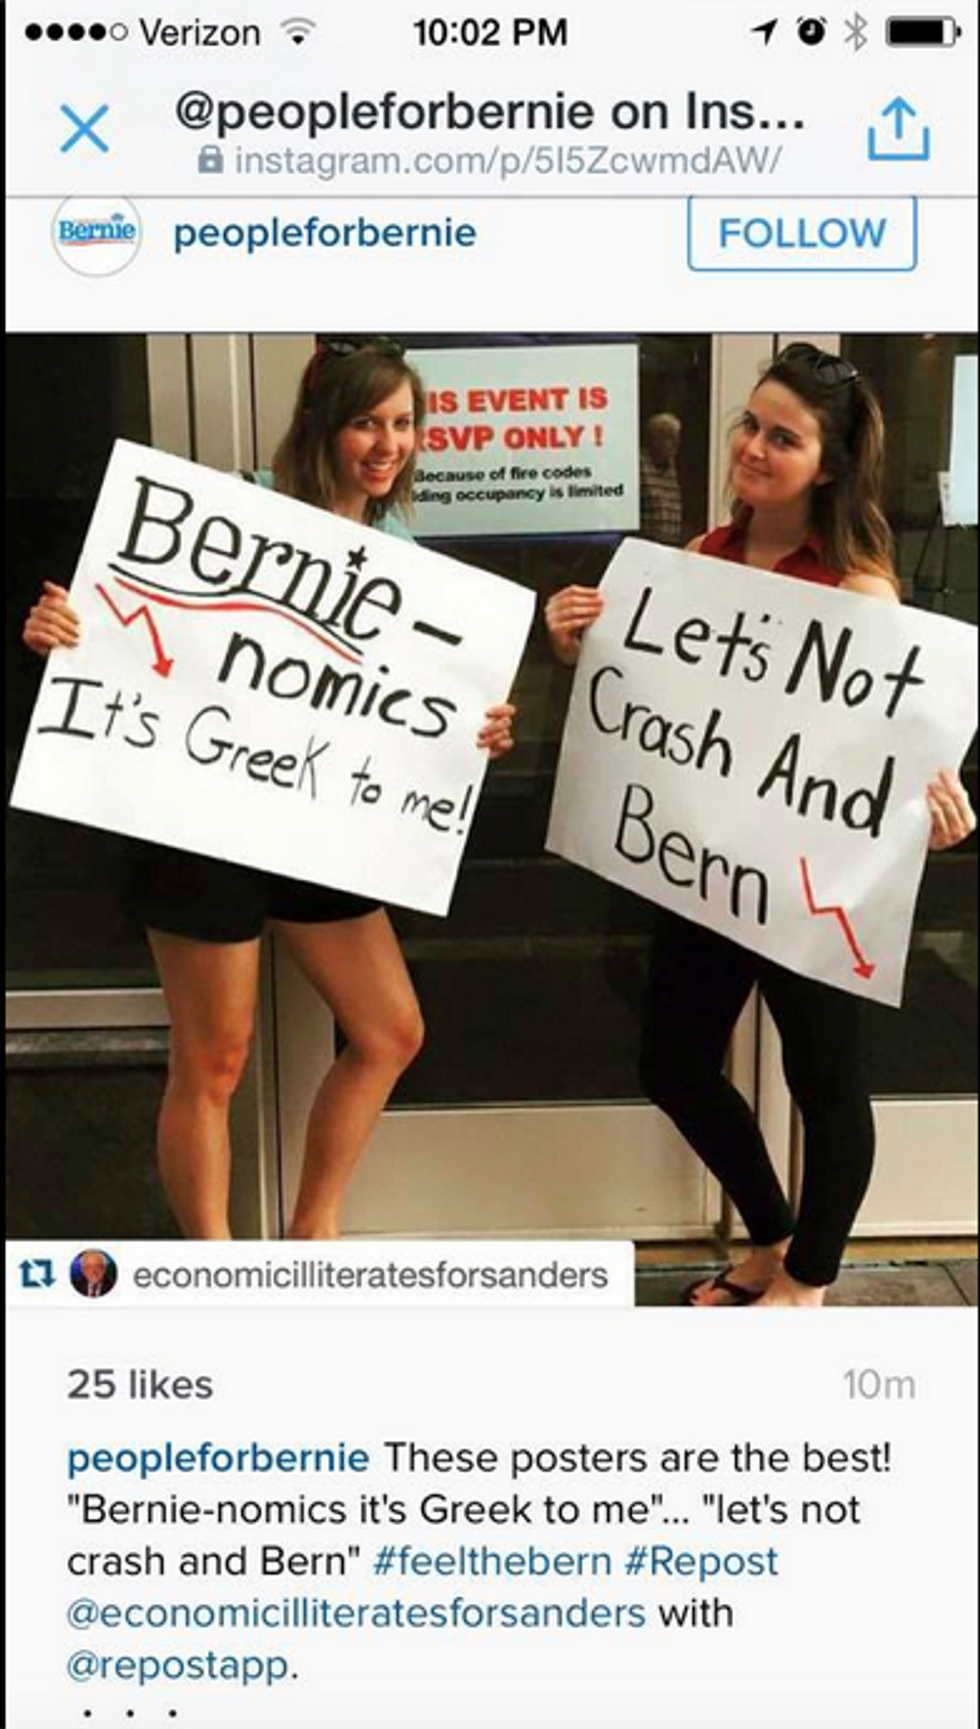 Oops: See the Photo of Two Girls a Bernie Sanders Activist Group Wishes They Wouldn't Have Promoted